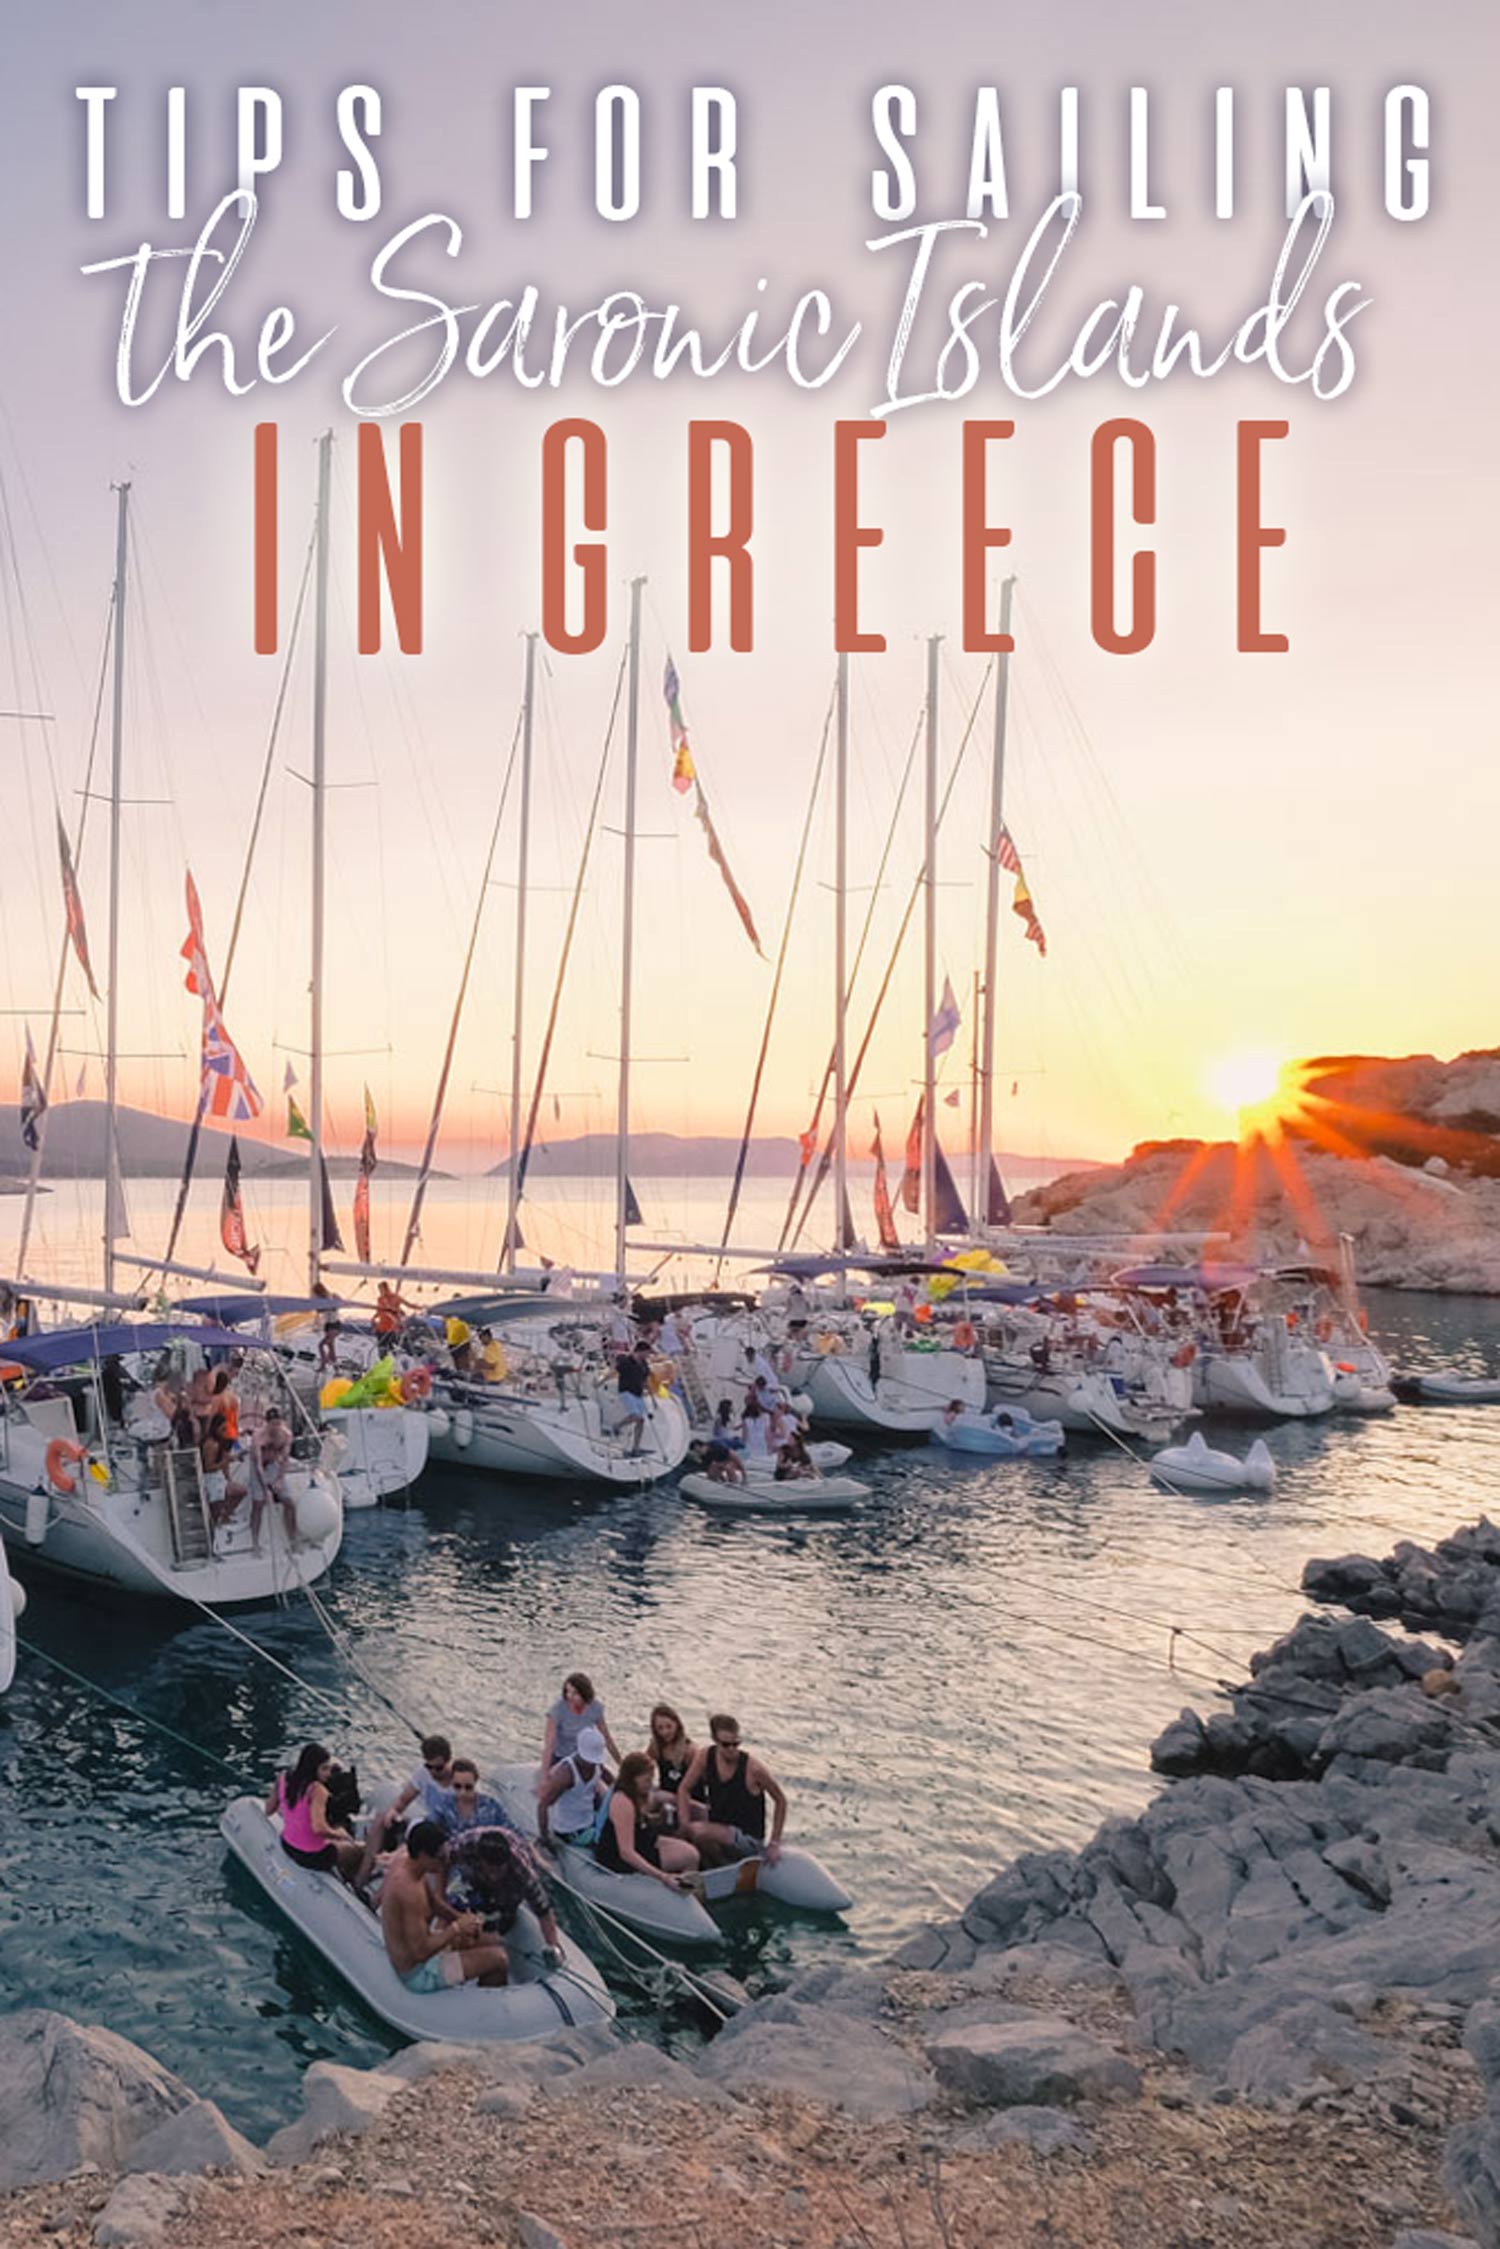 Top for Sailing The Saronic Islands in Greece